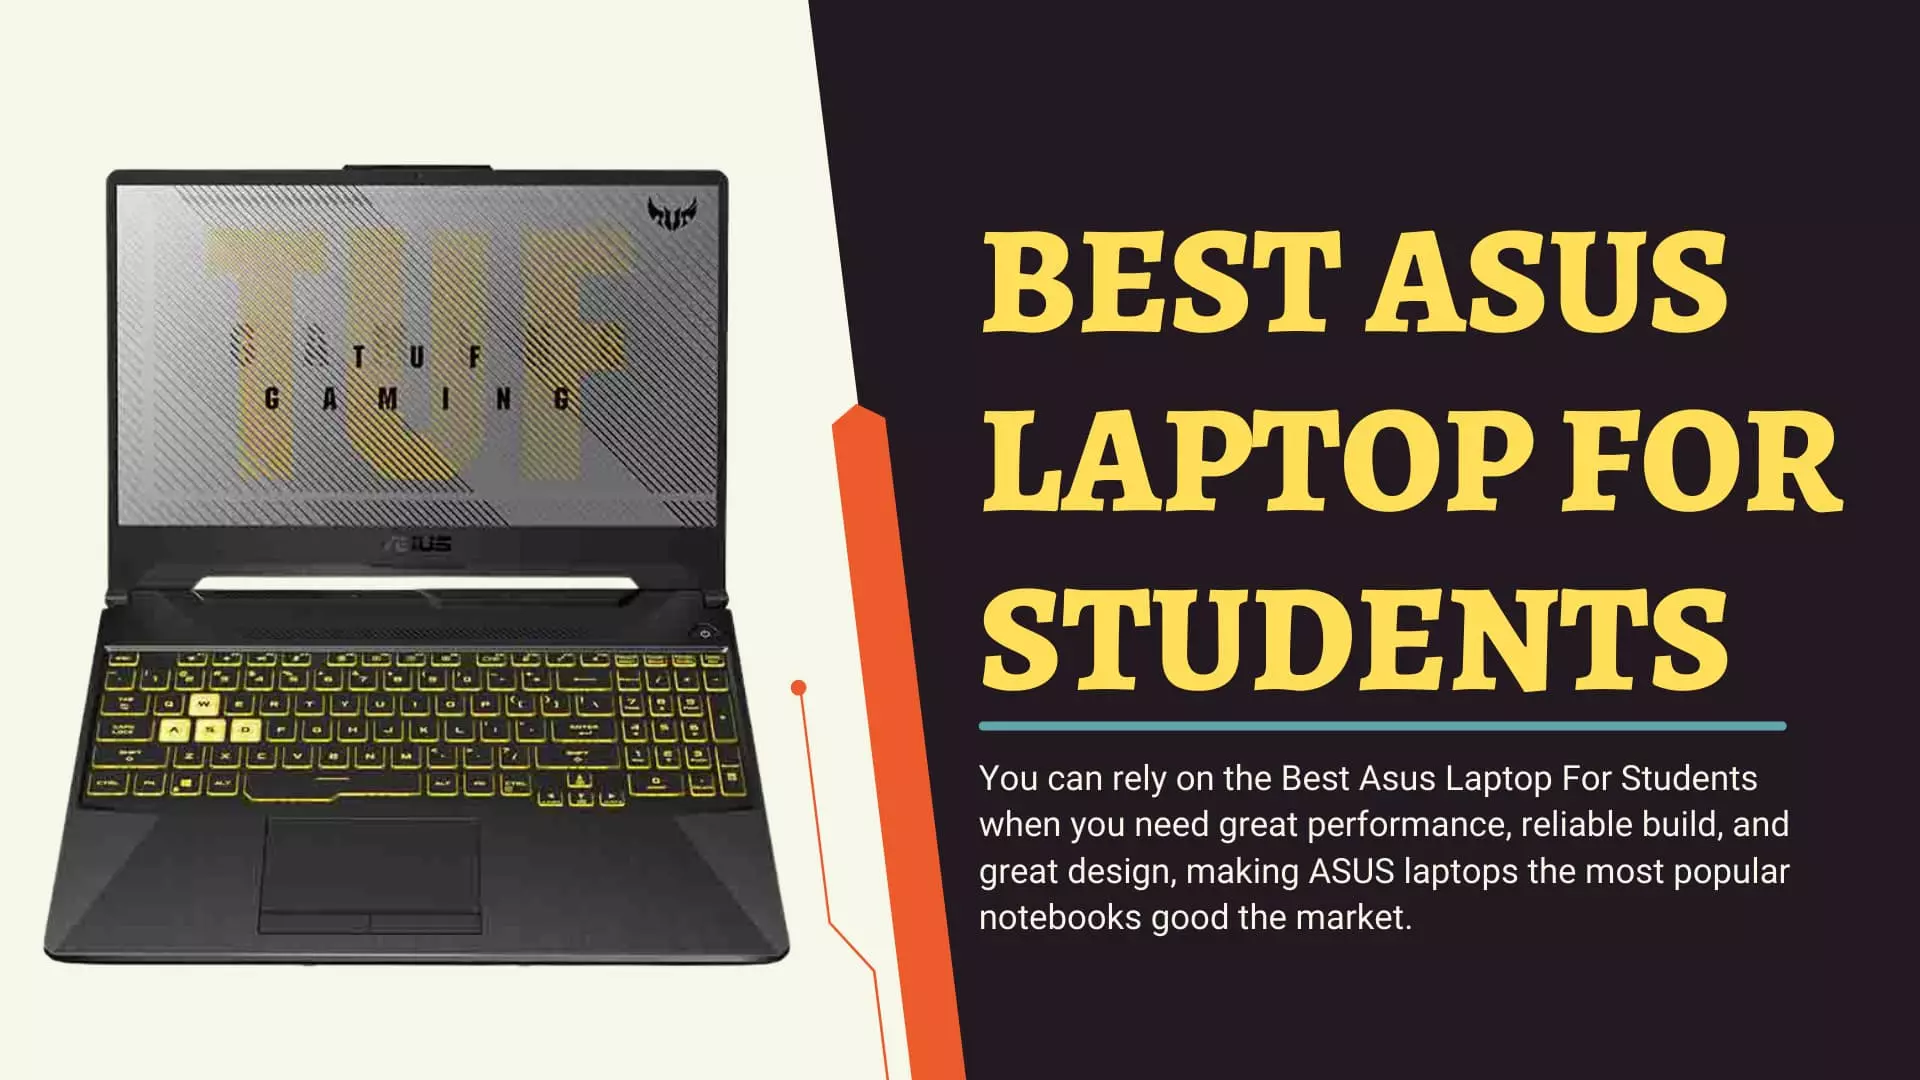 Best Asus Laptop For Students